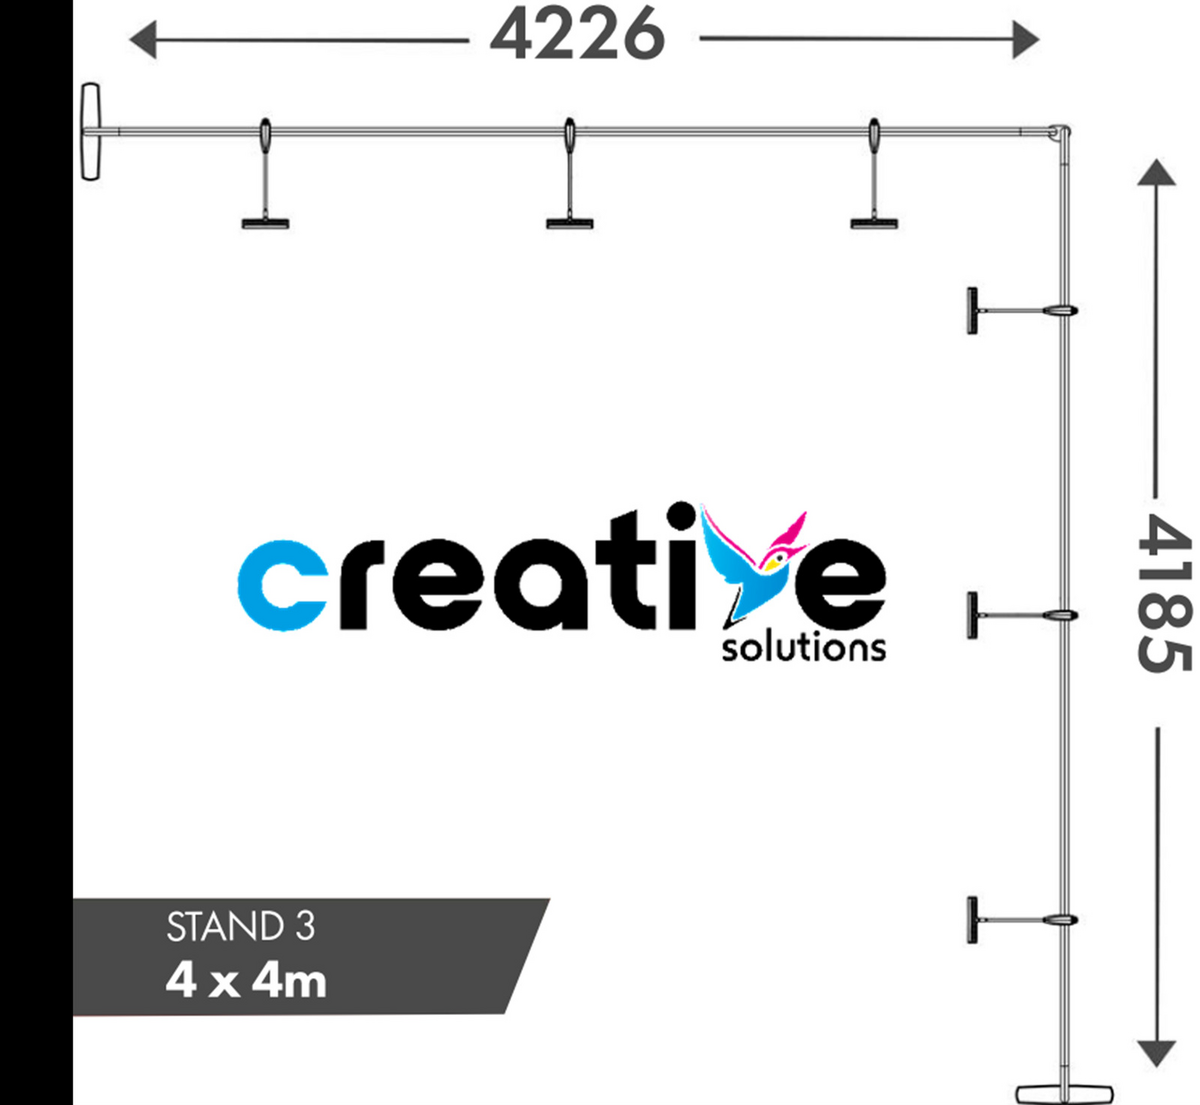 4x4 Shell Scheme Fabric Exhibition Stand Dimensions - Creative Solutions.png